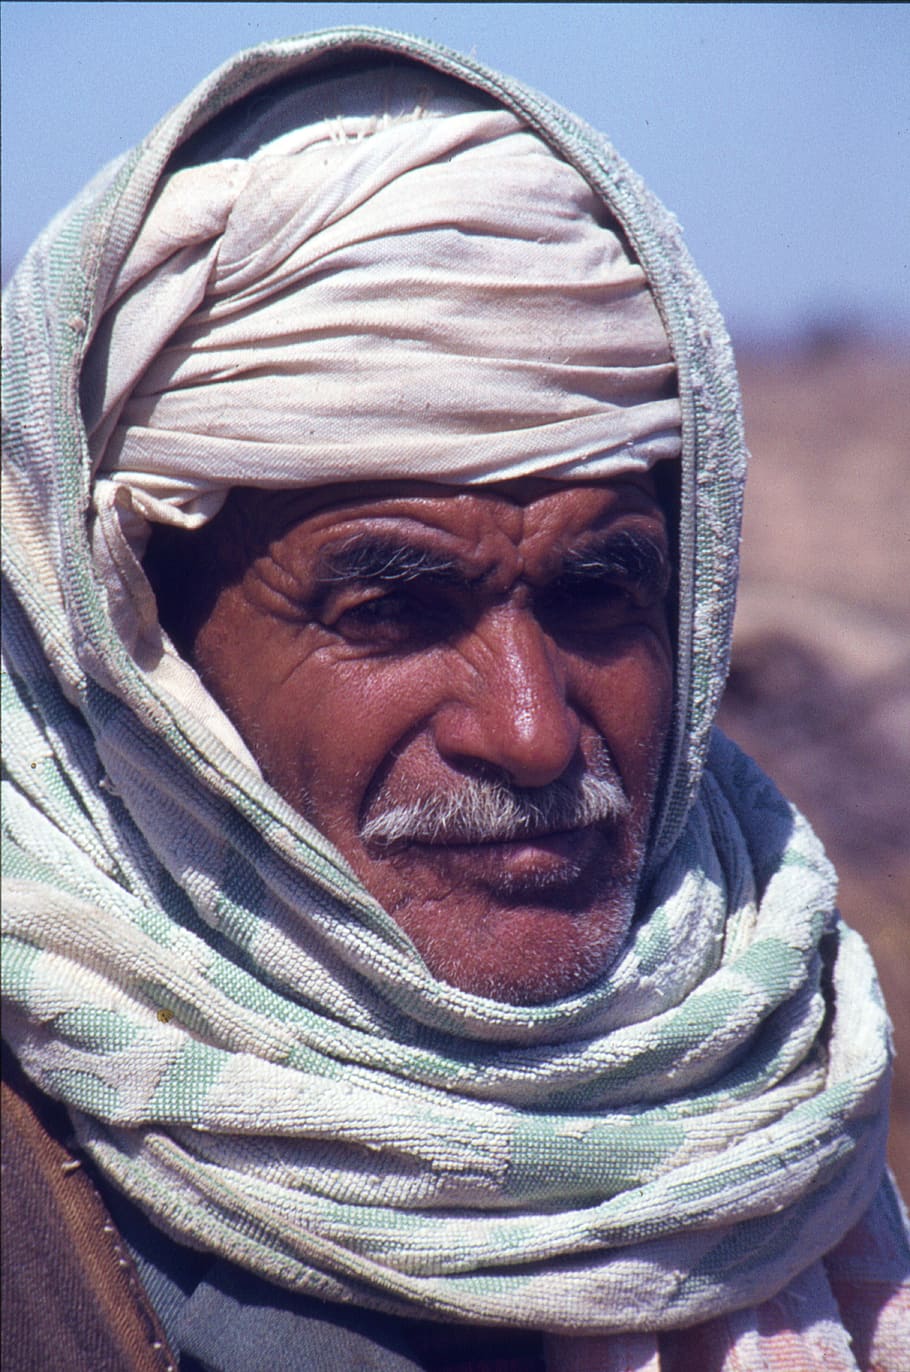 nomad, man, desert, tunisia, real people, headshot, portrait, males, one person, adult